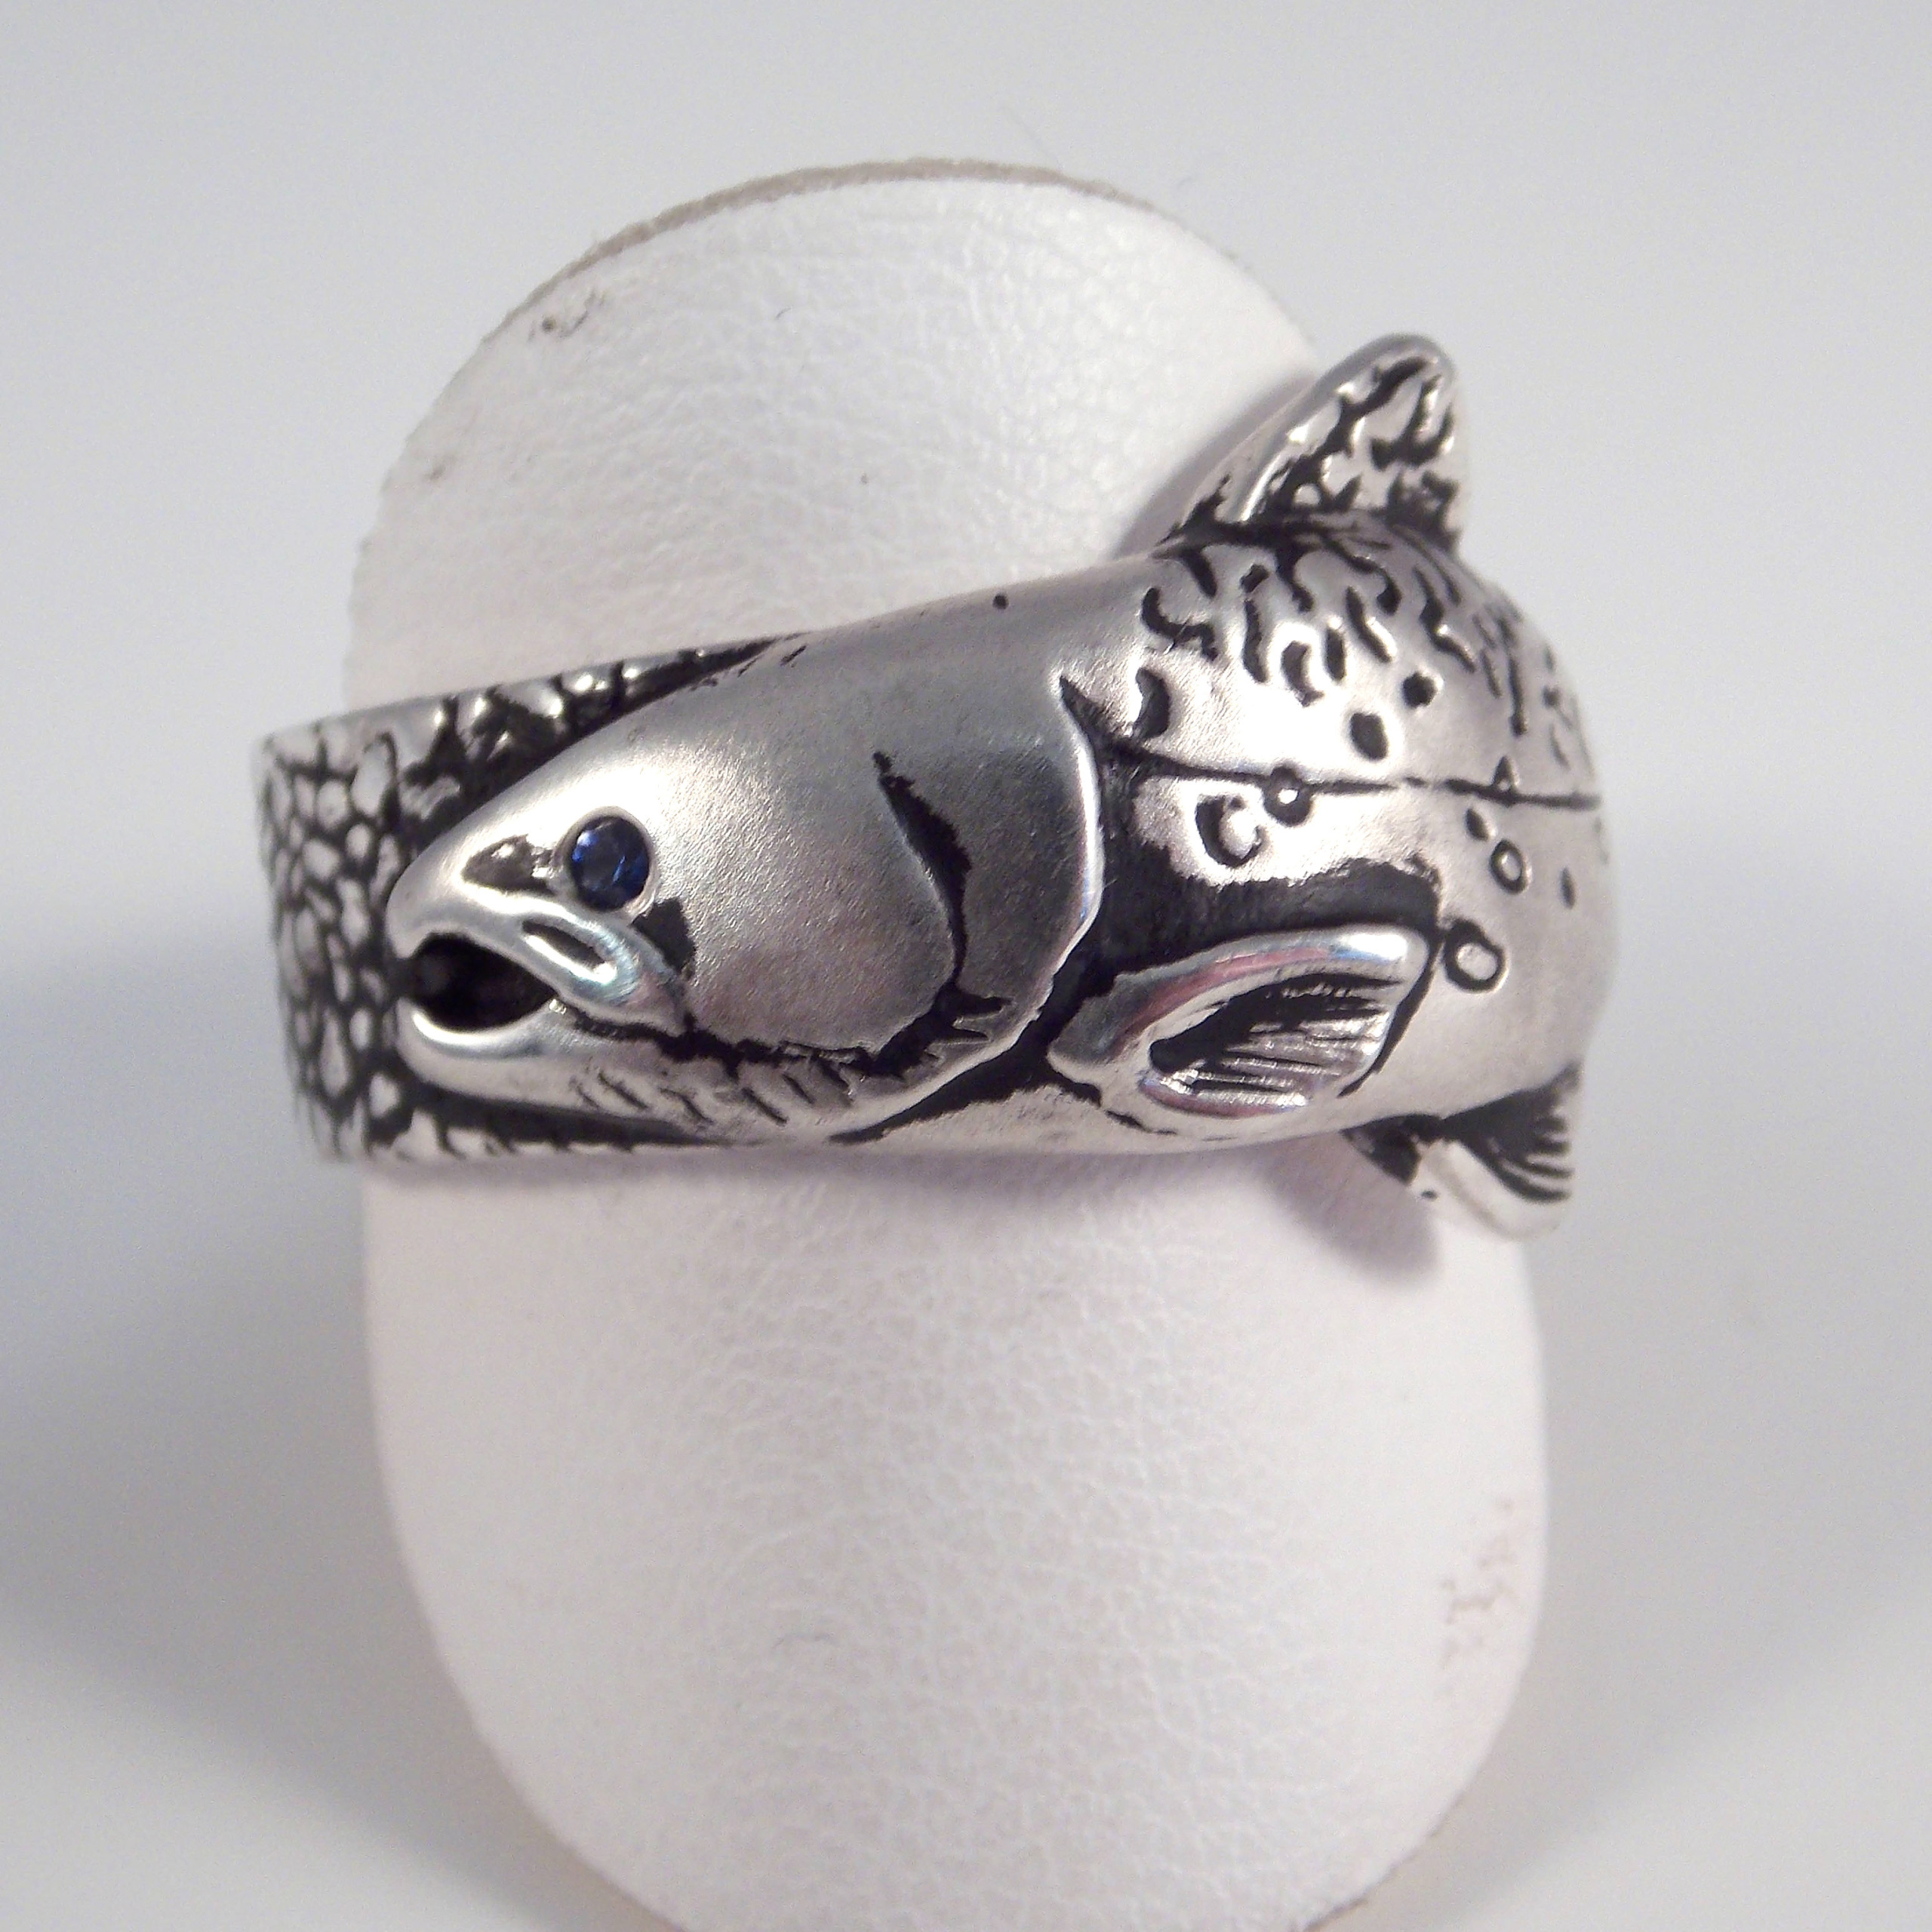 Brook Trout Silver Fish Ring